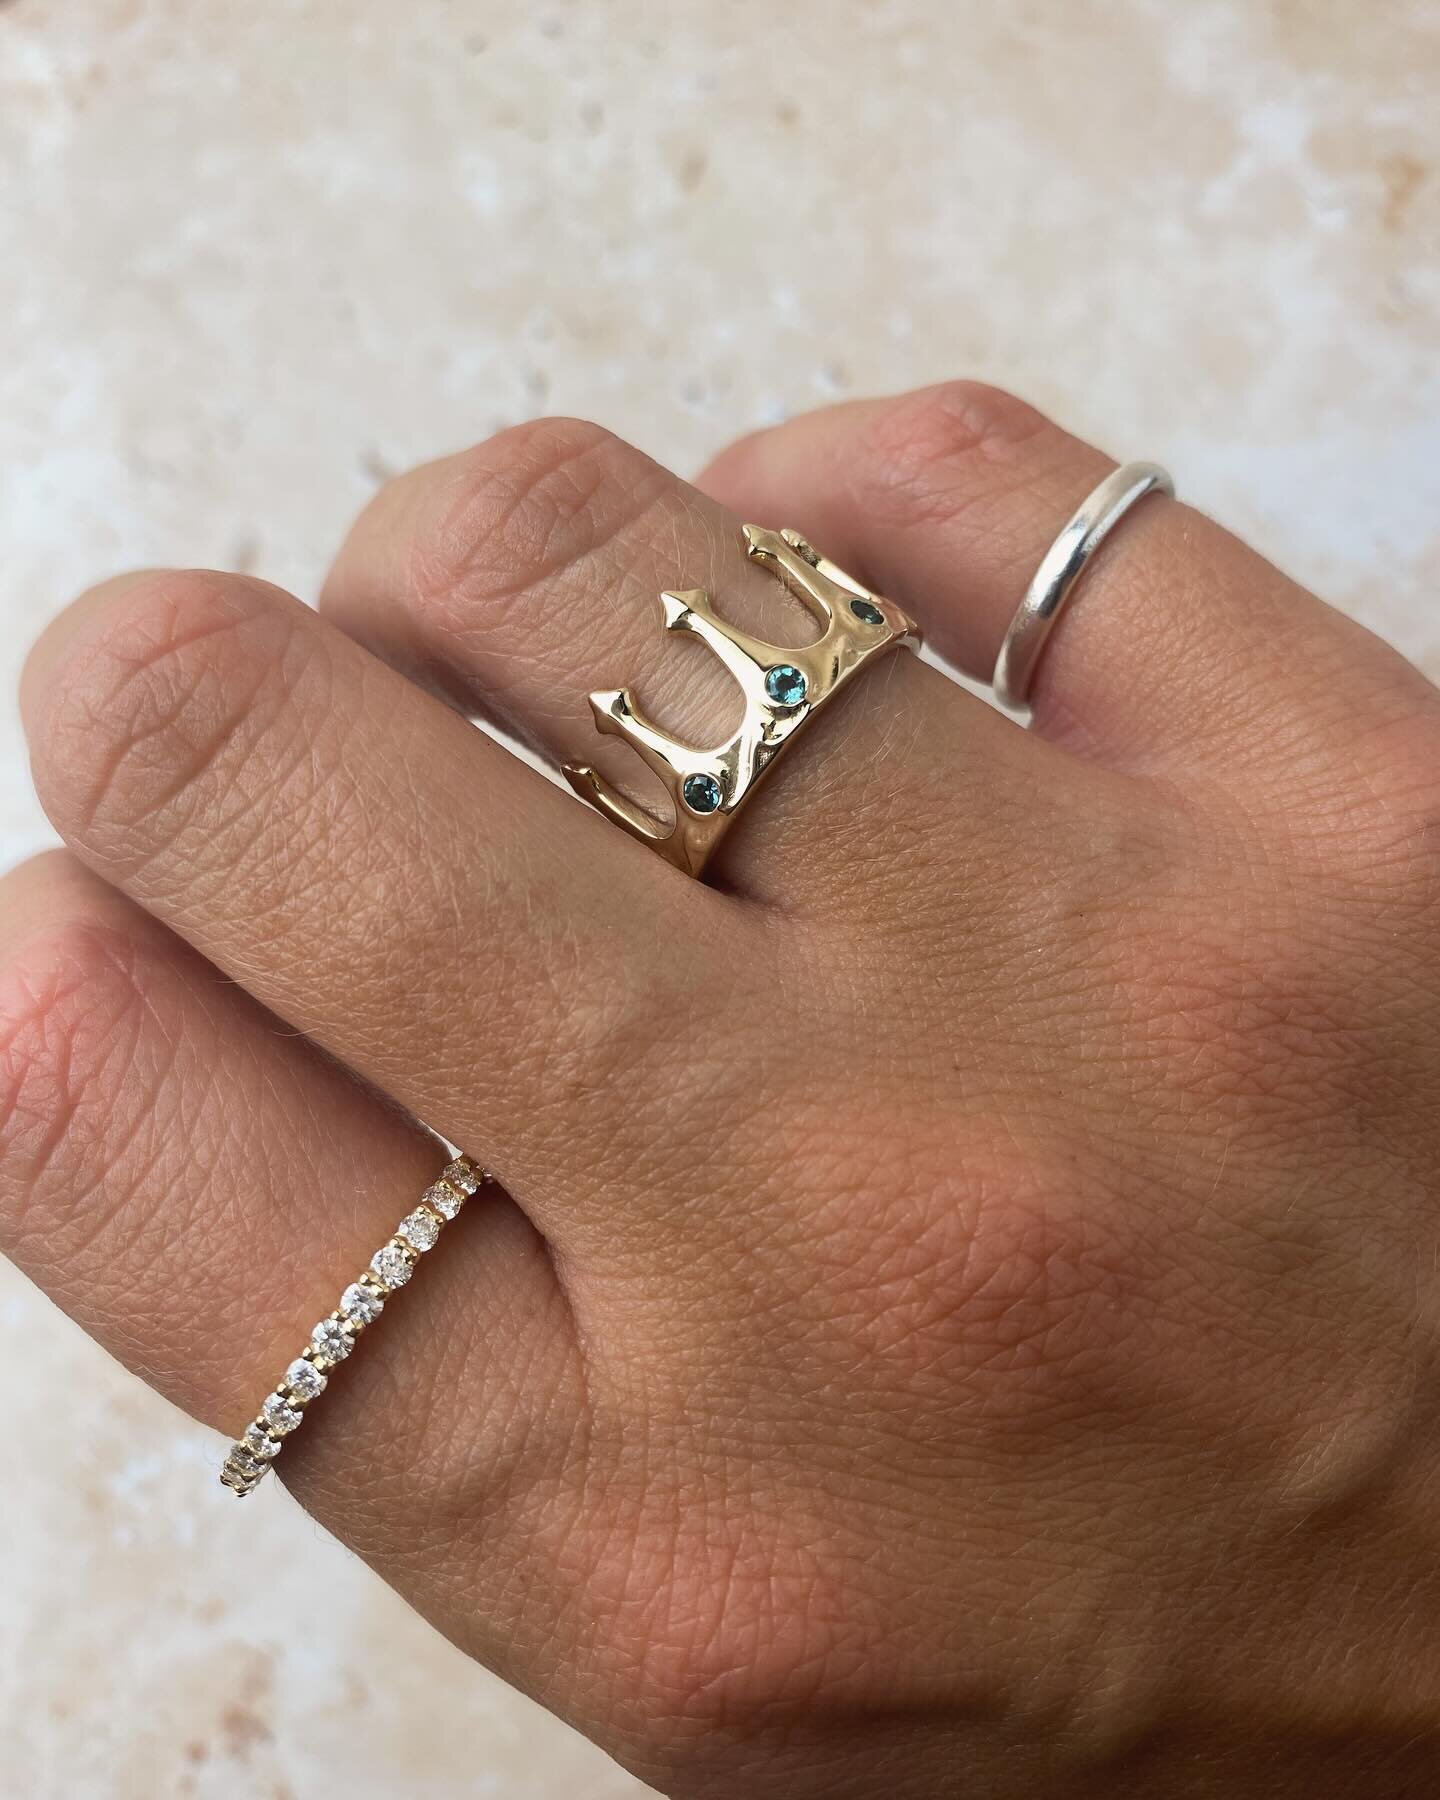 🌊 Ocean mythology 💙

Both of these rings have ties to the sea, on the left is the Aeon ocean diamond eternity ring and on the right is the Neptune&rsquo;s crown ring. 

The eternity ring has diamonds sourced sustainably and ethically from the sea b